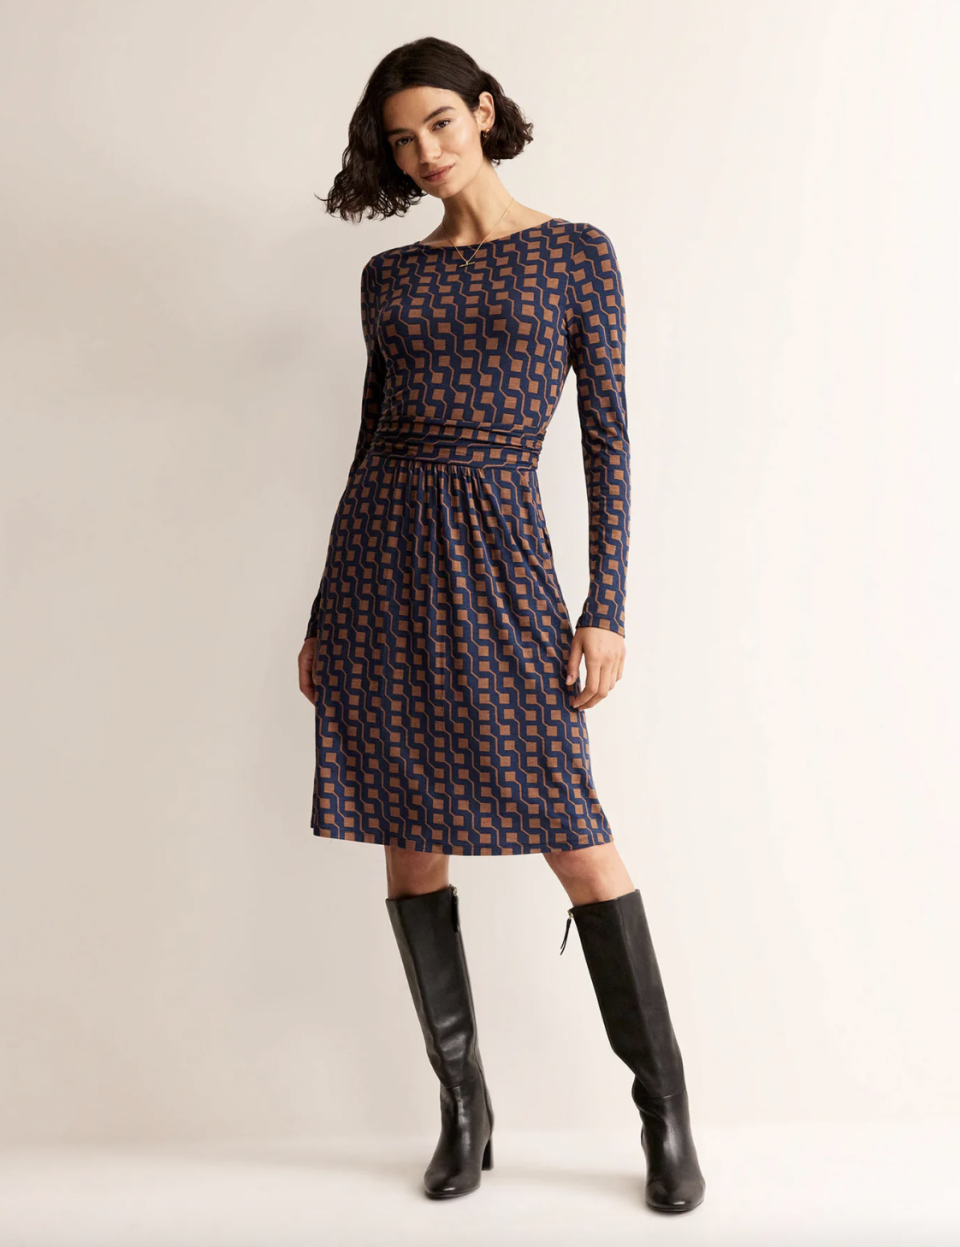 Hitting just above the knee, it's the perfect midi length. (Boden)